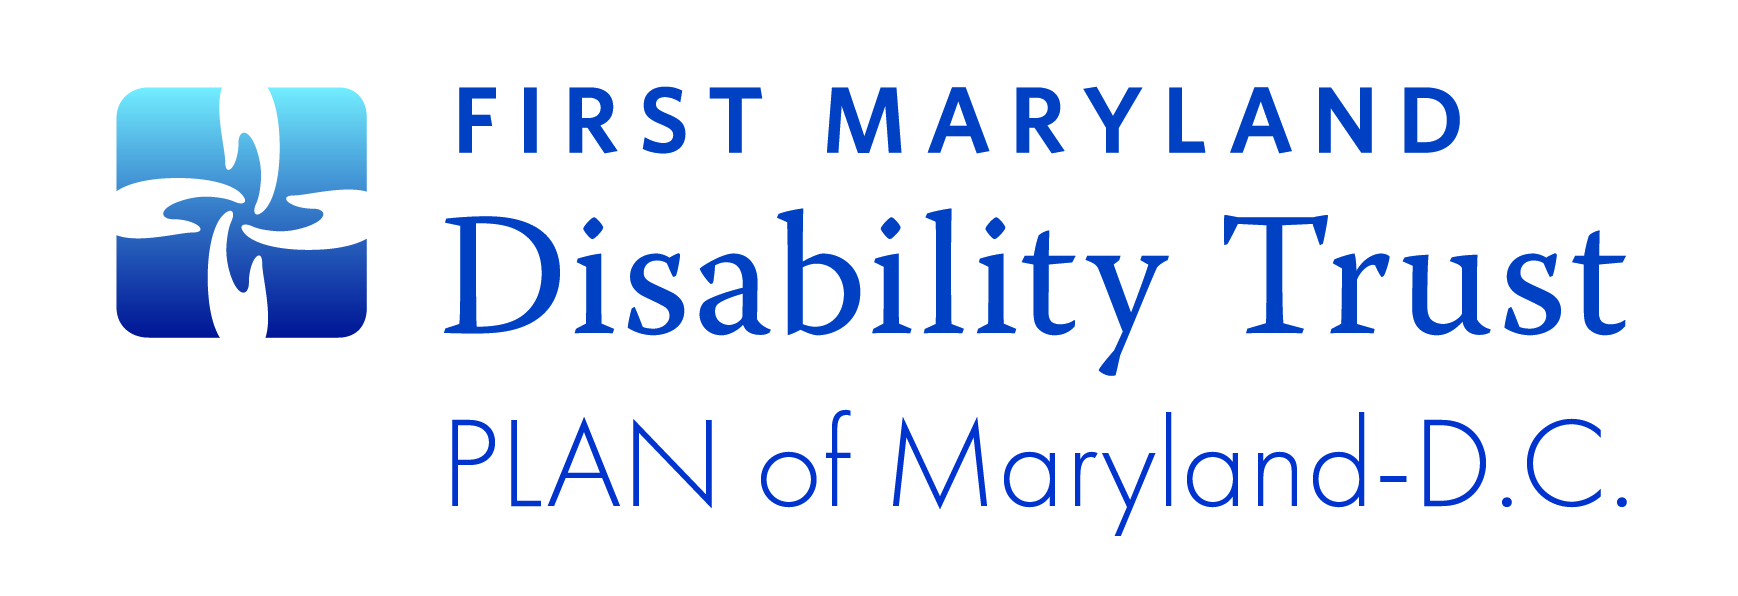 First Maryland Disability Trust Logo